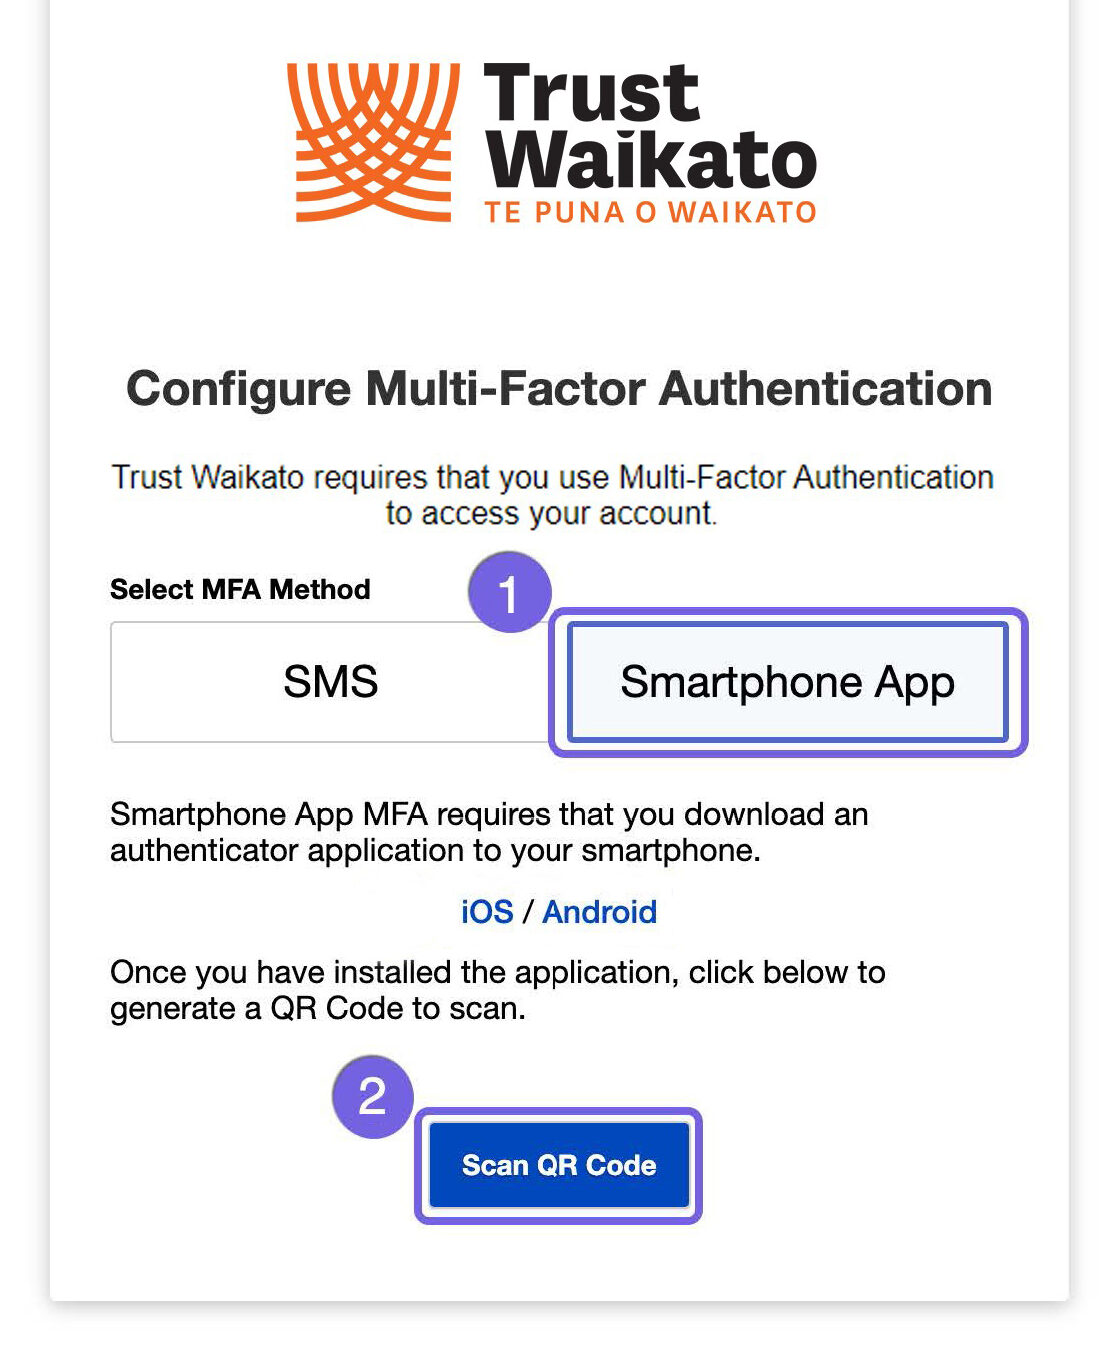 Trust Waikato grantee portal MFA configuration screen showing to select smartphone app and to scan QR code. 